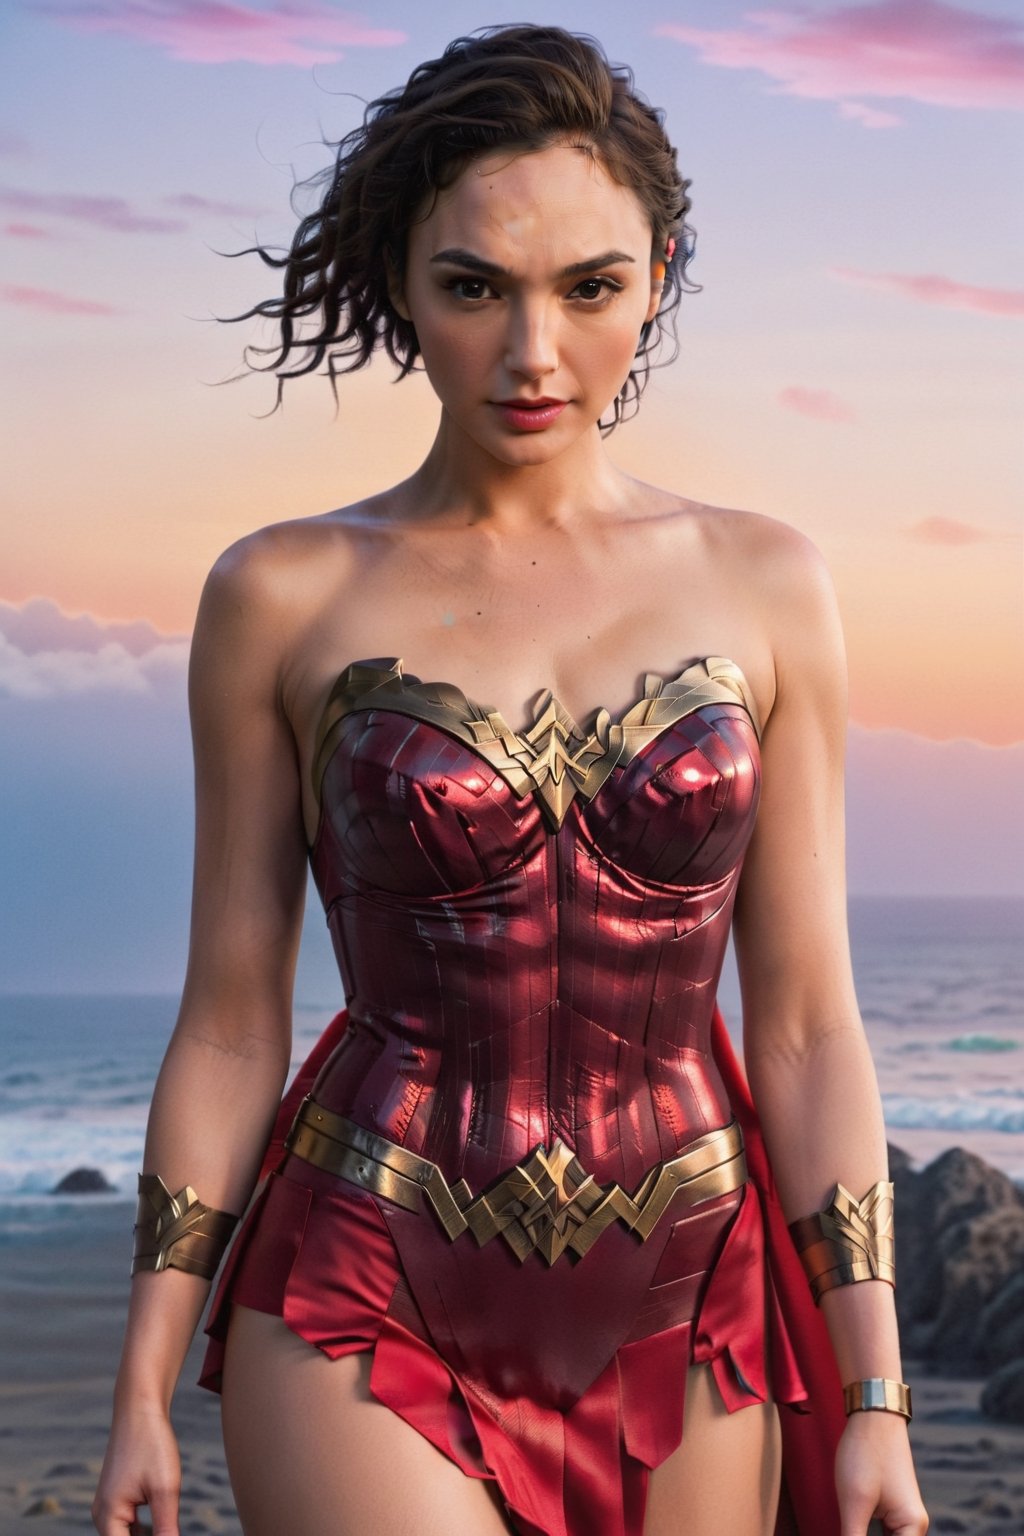 Gal Gadot wears a dress, Wonder Woman, Big Breast, Sultra Detailed Face, Symmetrical Eyes, Model Figure, Whole body, Perfect boobs, Cleavage , High quality, Very Detailed, Front view, 8K, euphoric style, Aesthetic Portrait, A Masterpiece, Photo, Extremely Realistic,p3rfect boobs,cleavage